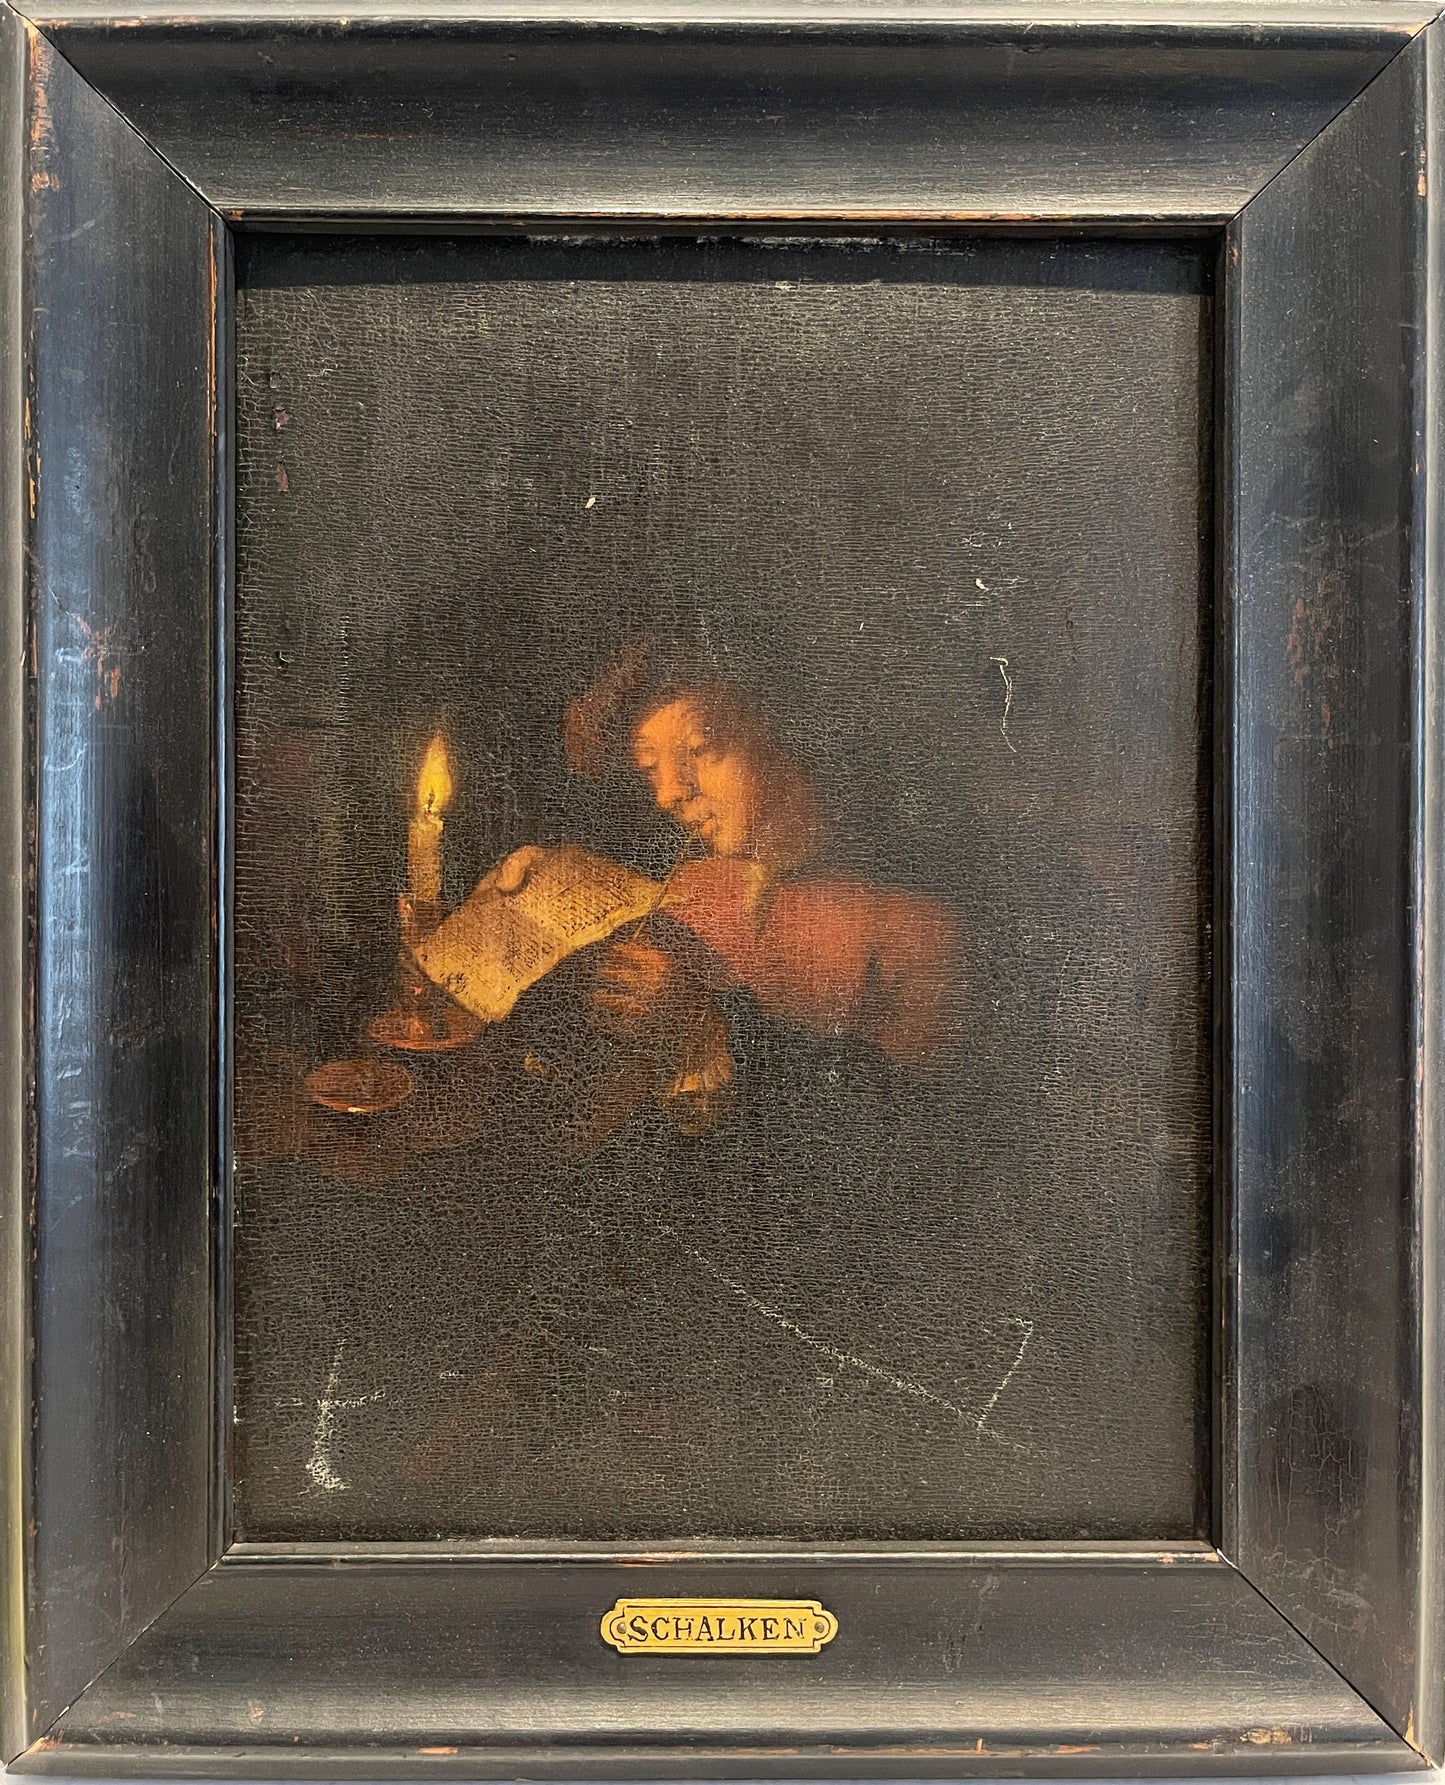 Godfried Schalken Oil Painting: Man reading in candlelight